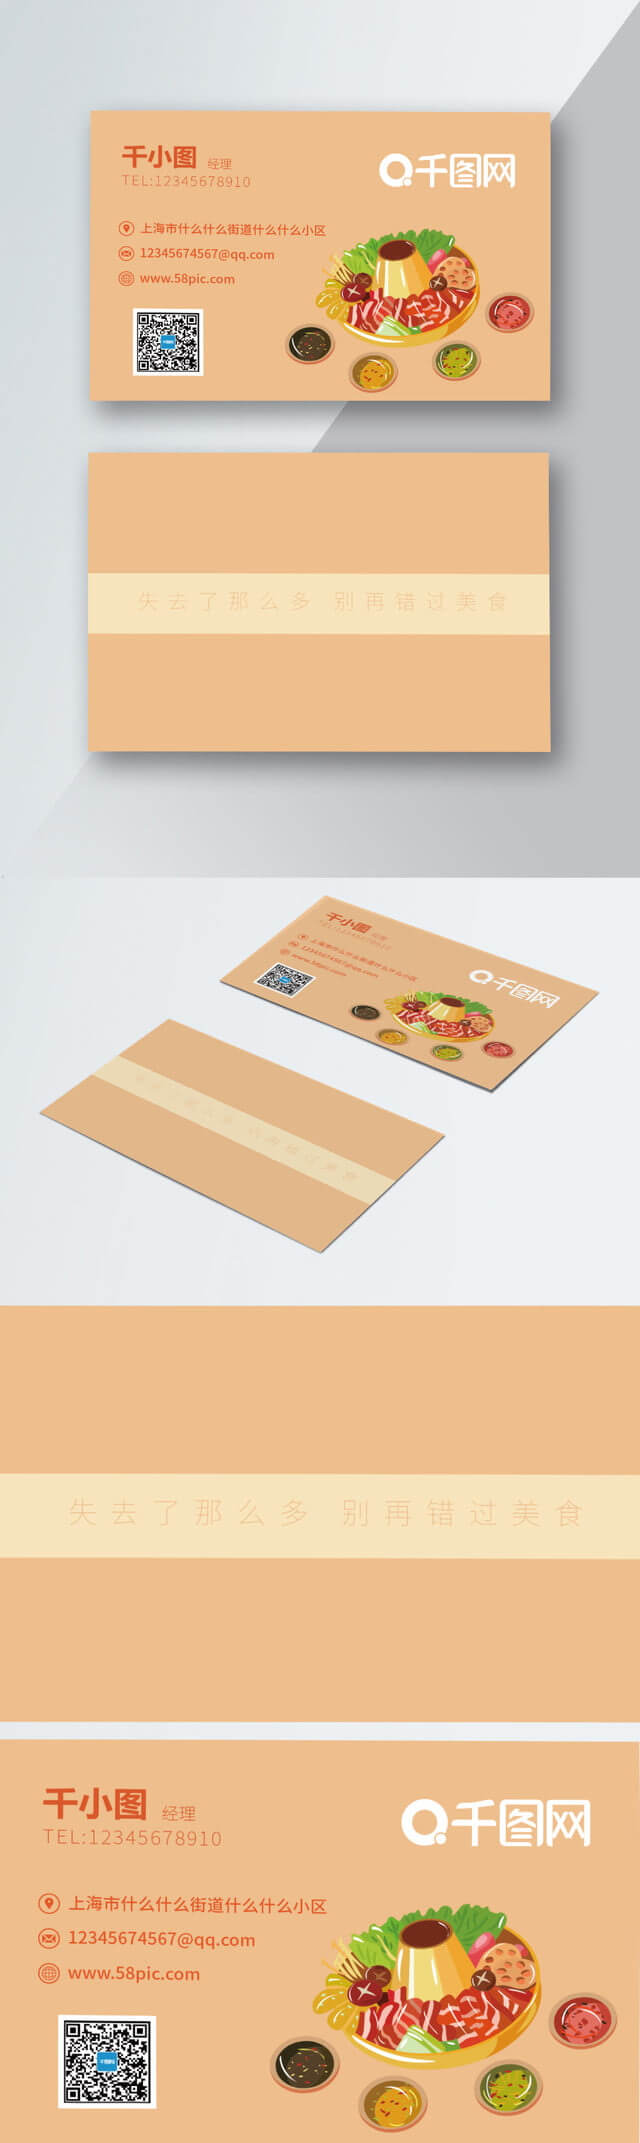 Business Card Free Download Business Card Fast Food Catering In Food Business Cards Templates Free